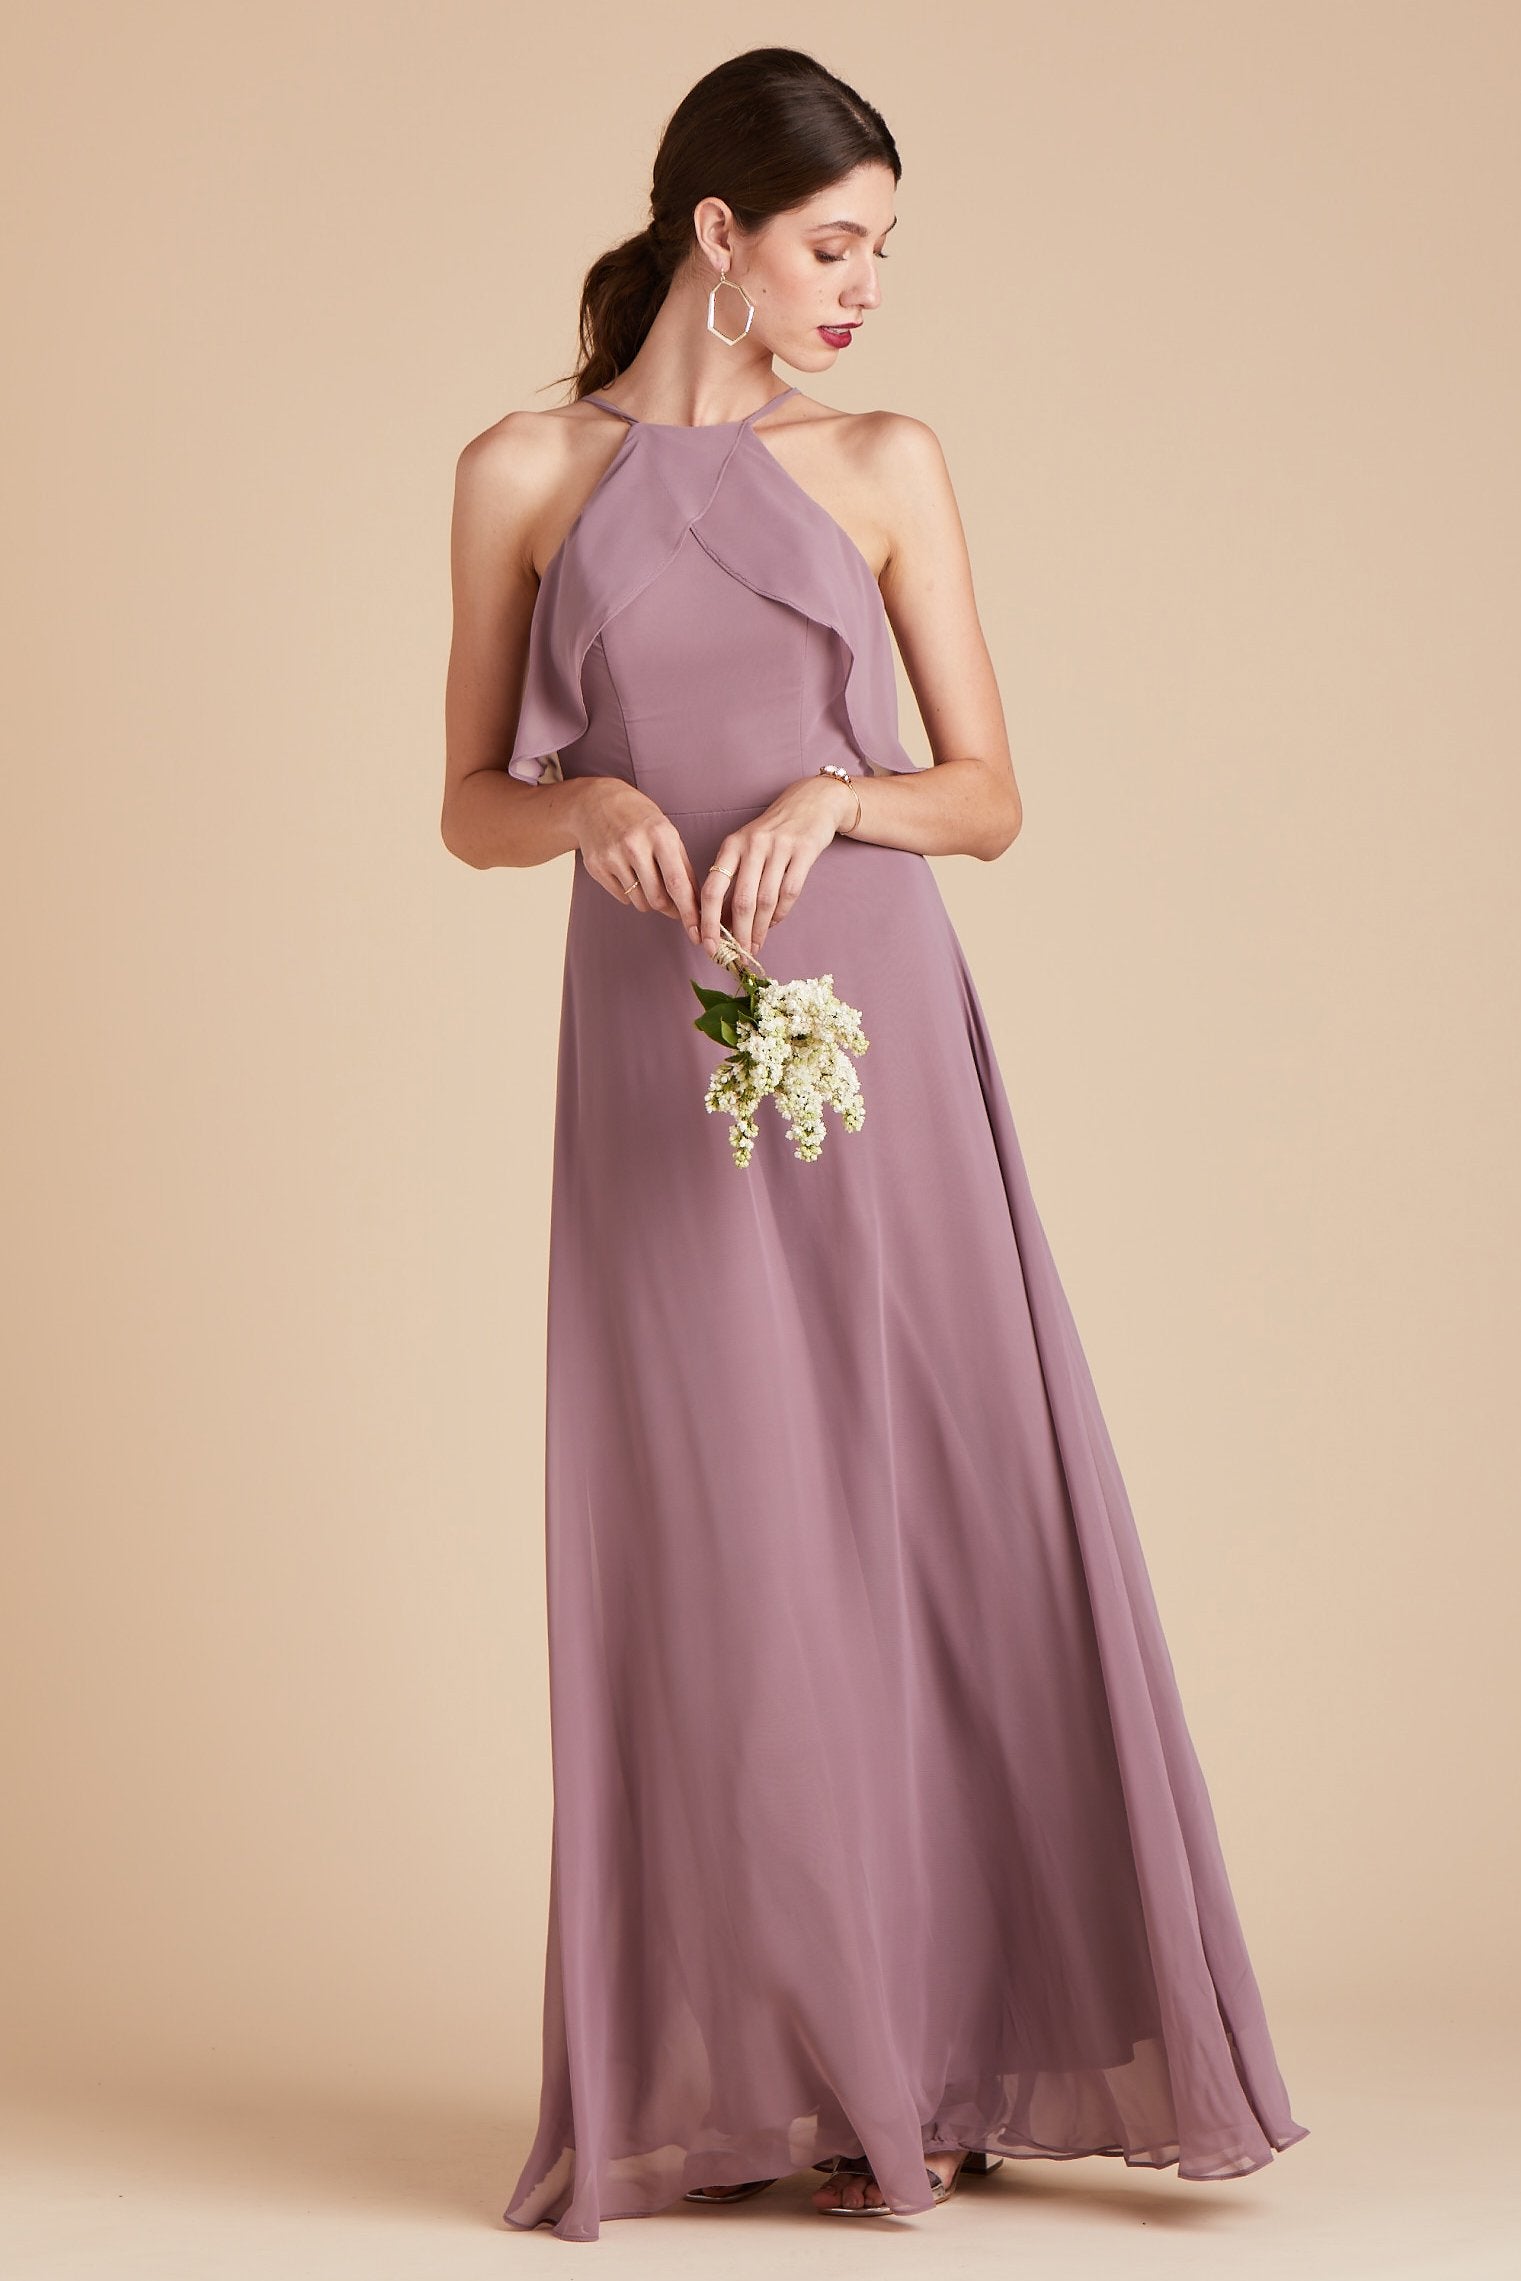 Jules bridesmaid dress in dark mauve chiffon by Birdy Grey, front view